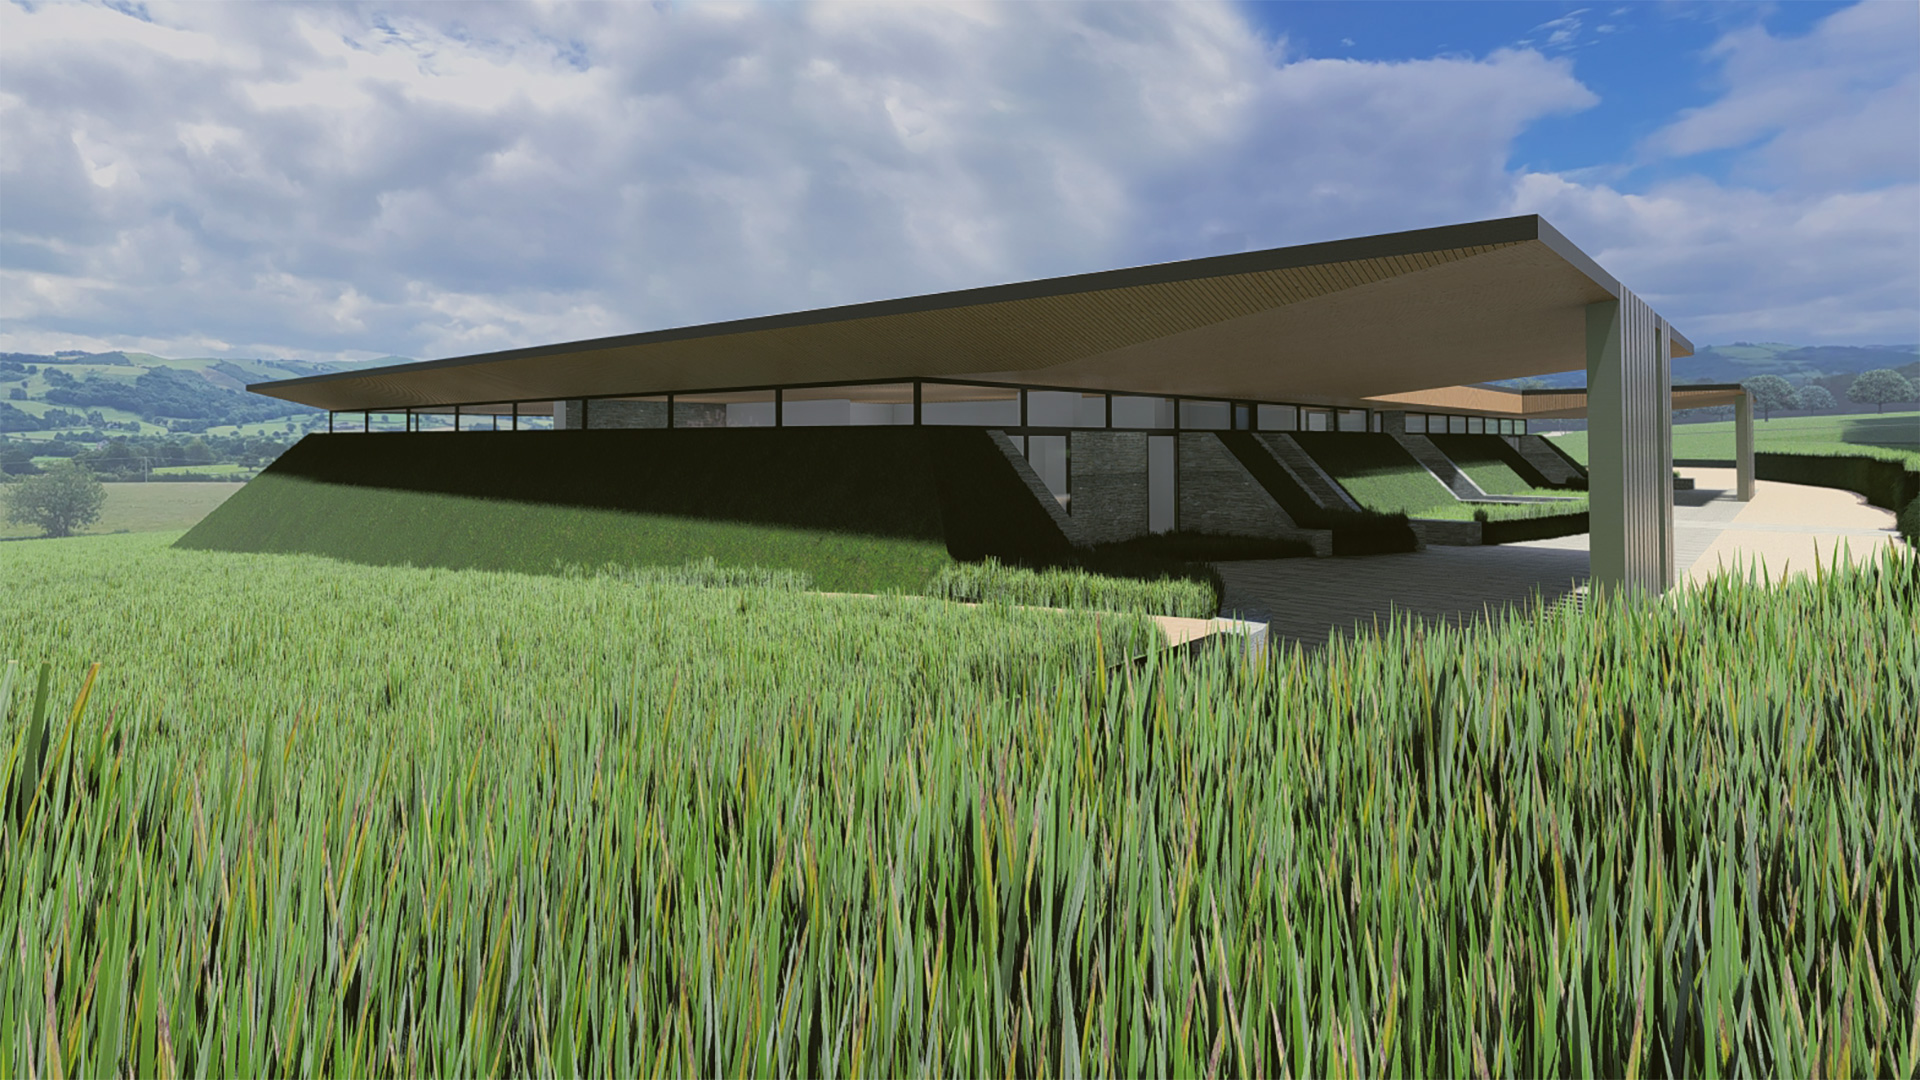 concept for a new contemporary crematorium in Wales